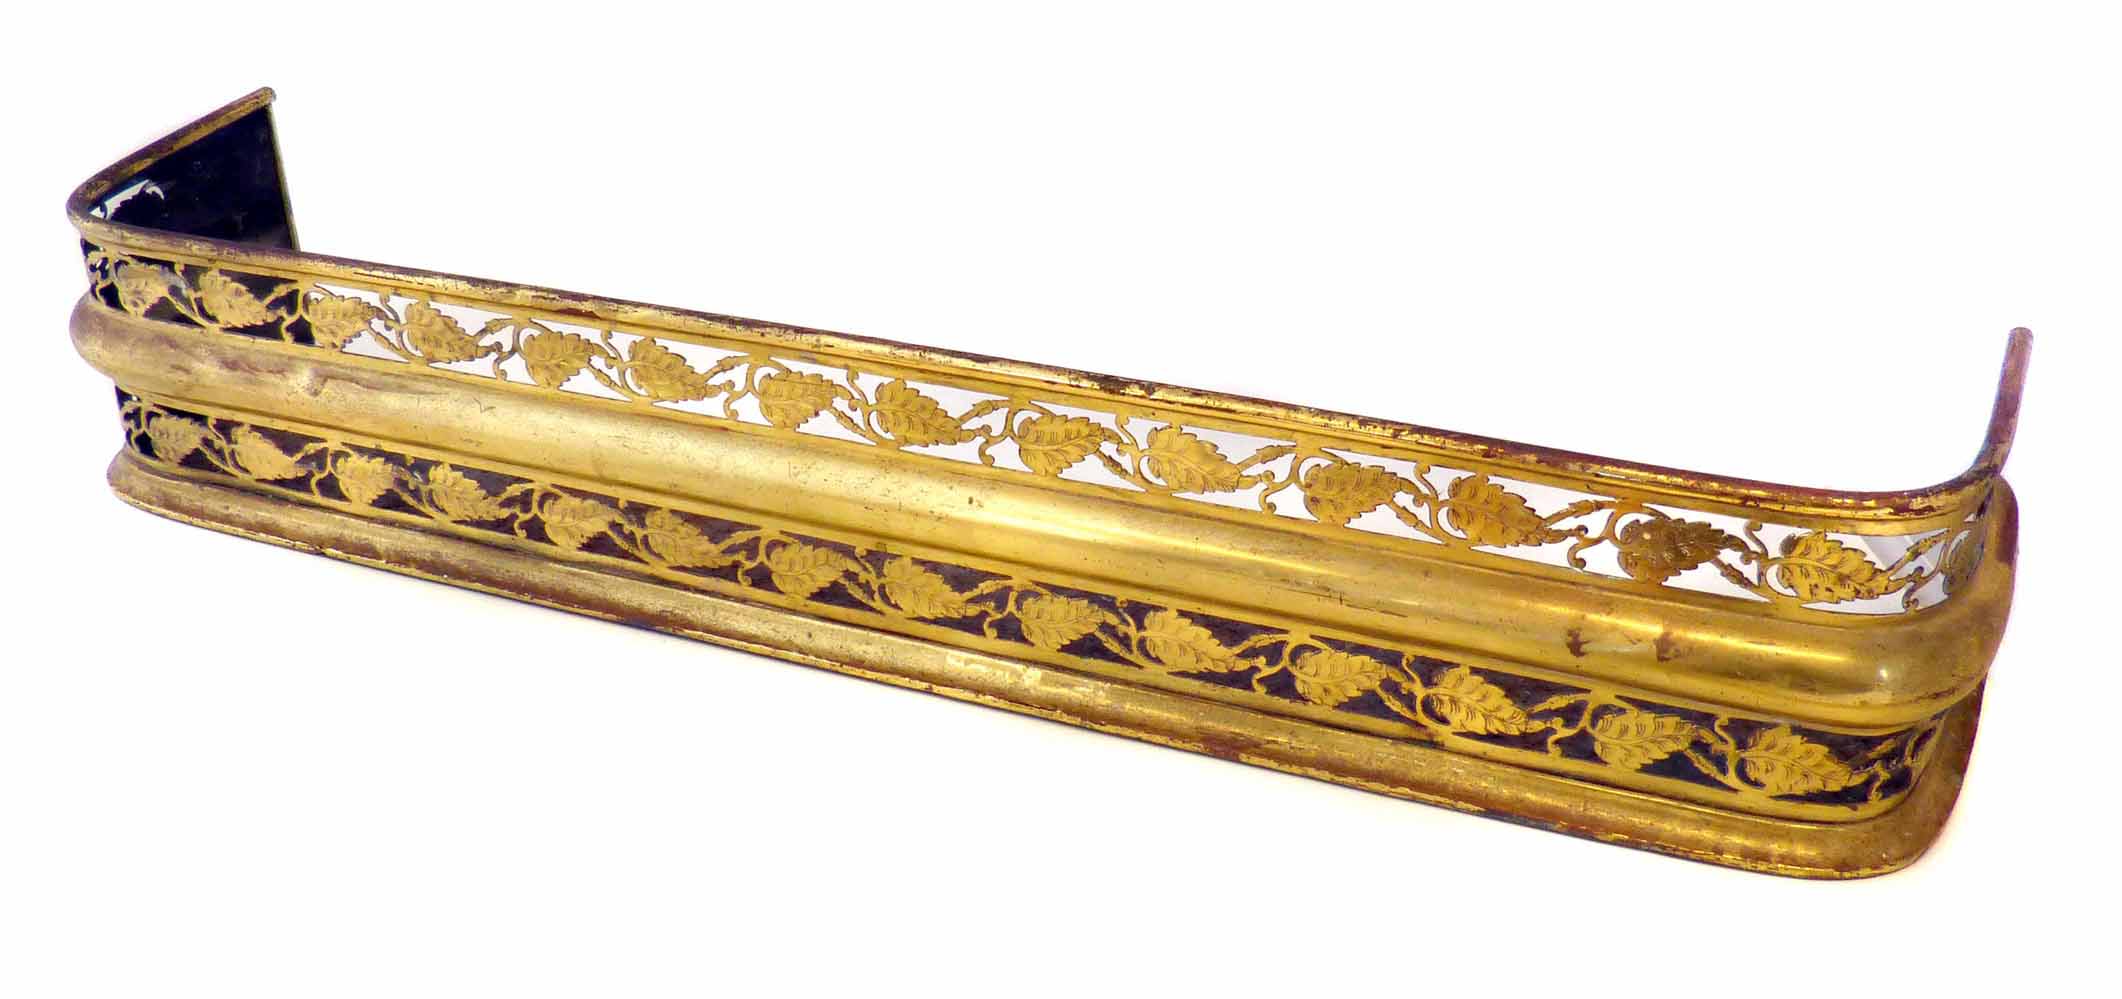 A small Georgian style antique cut brass fireplace fender, with a central band and two tiers of